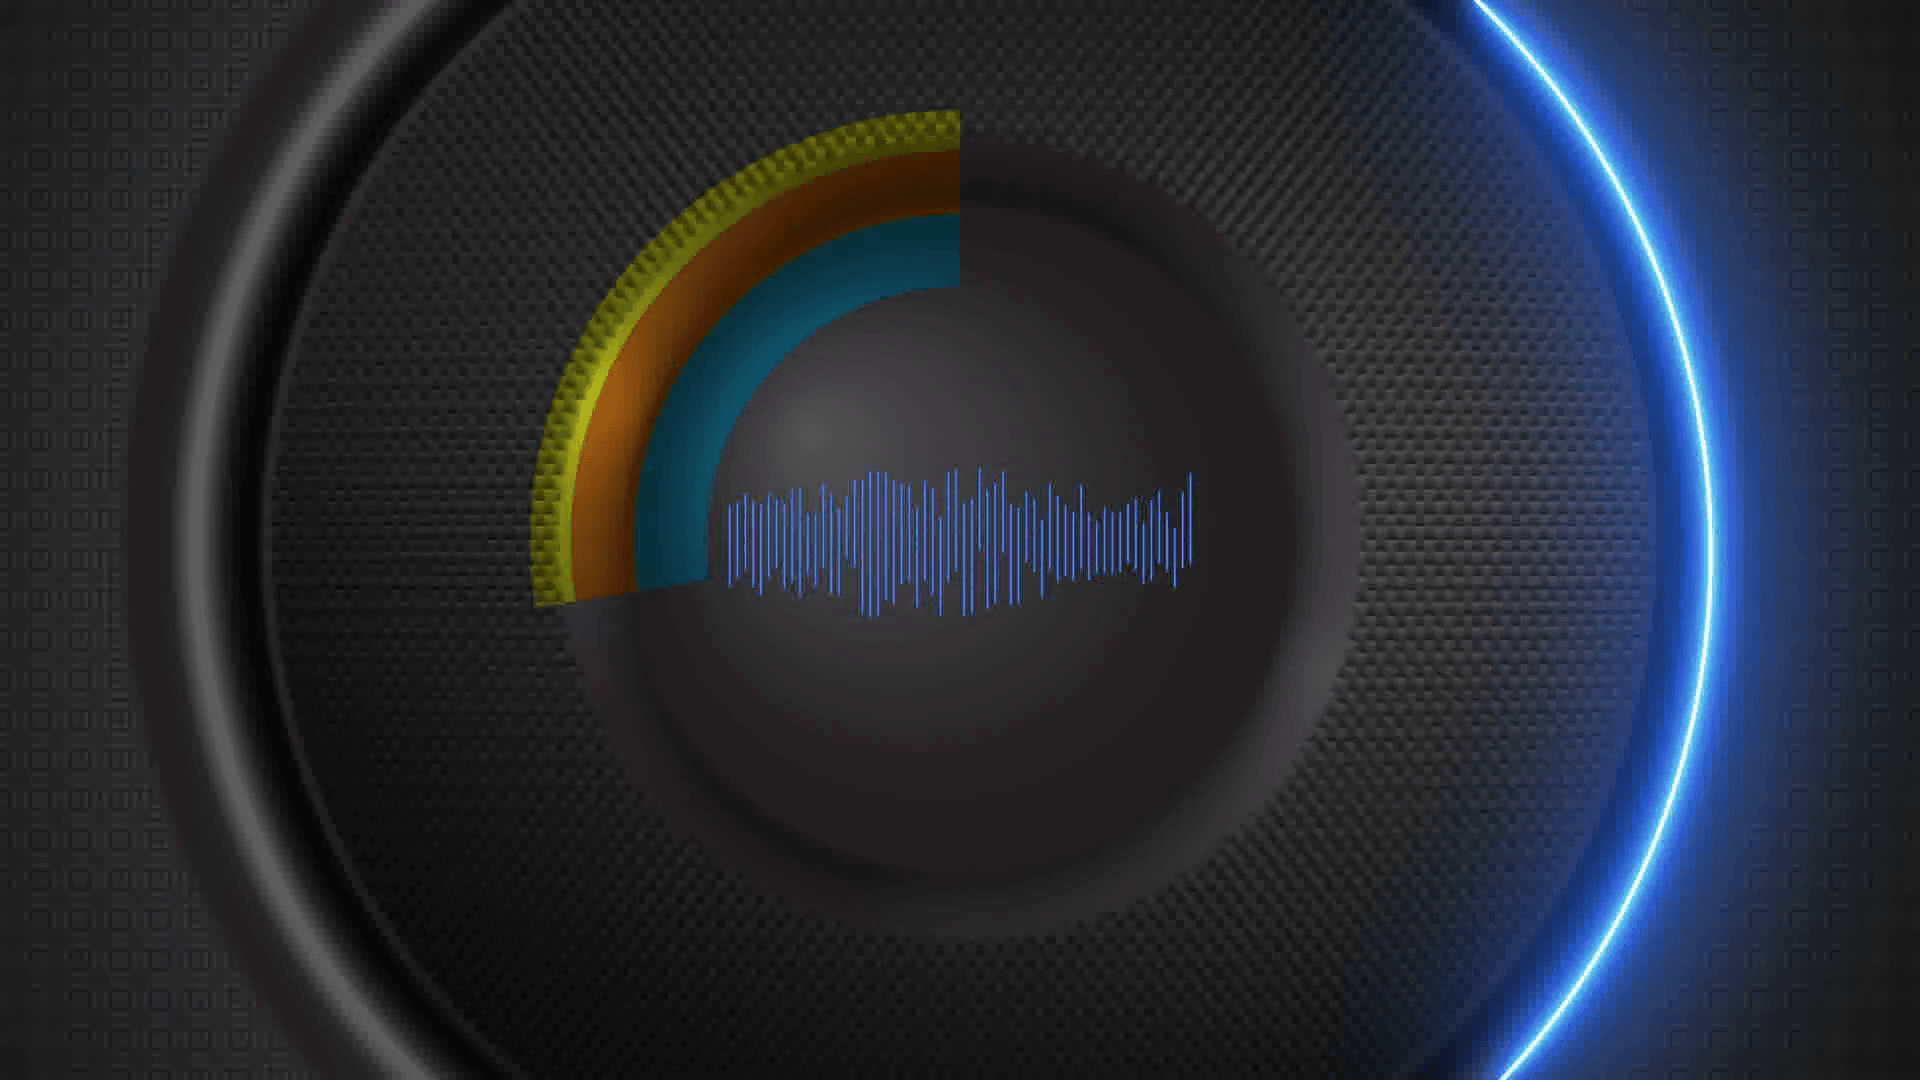 Speaker animation that plays low bass frequencies. Animated audio